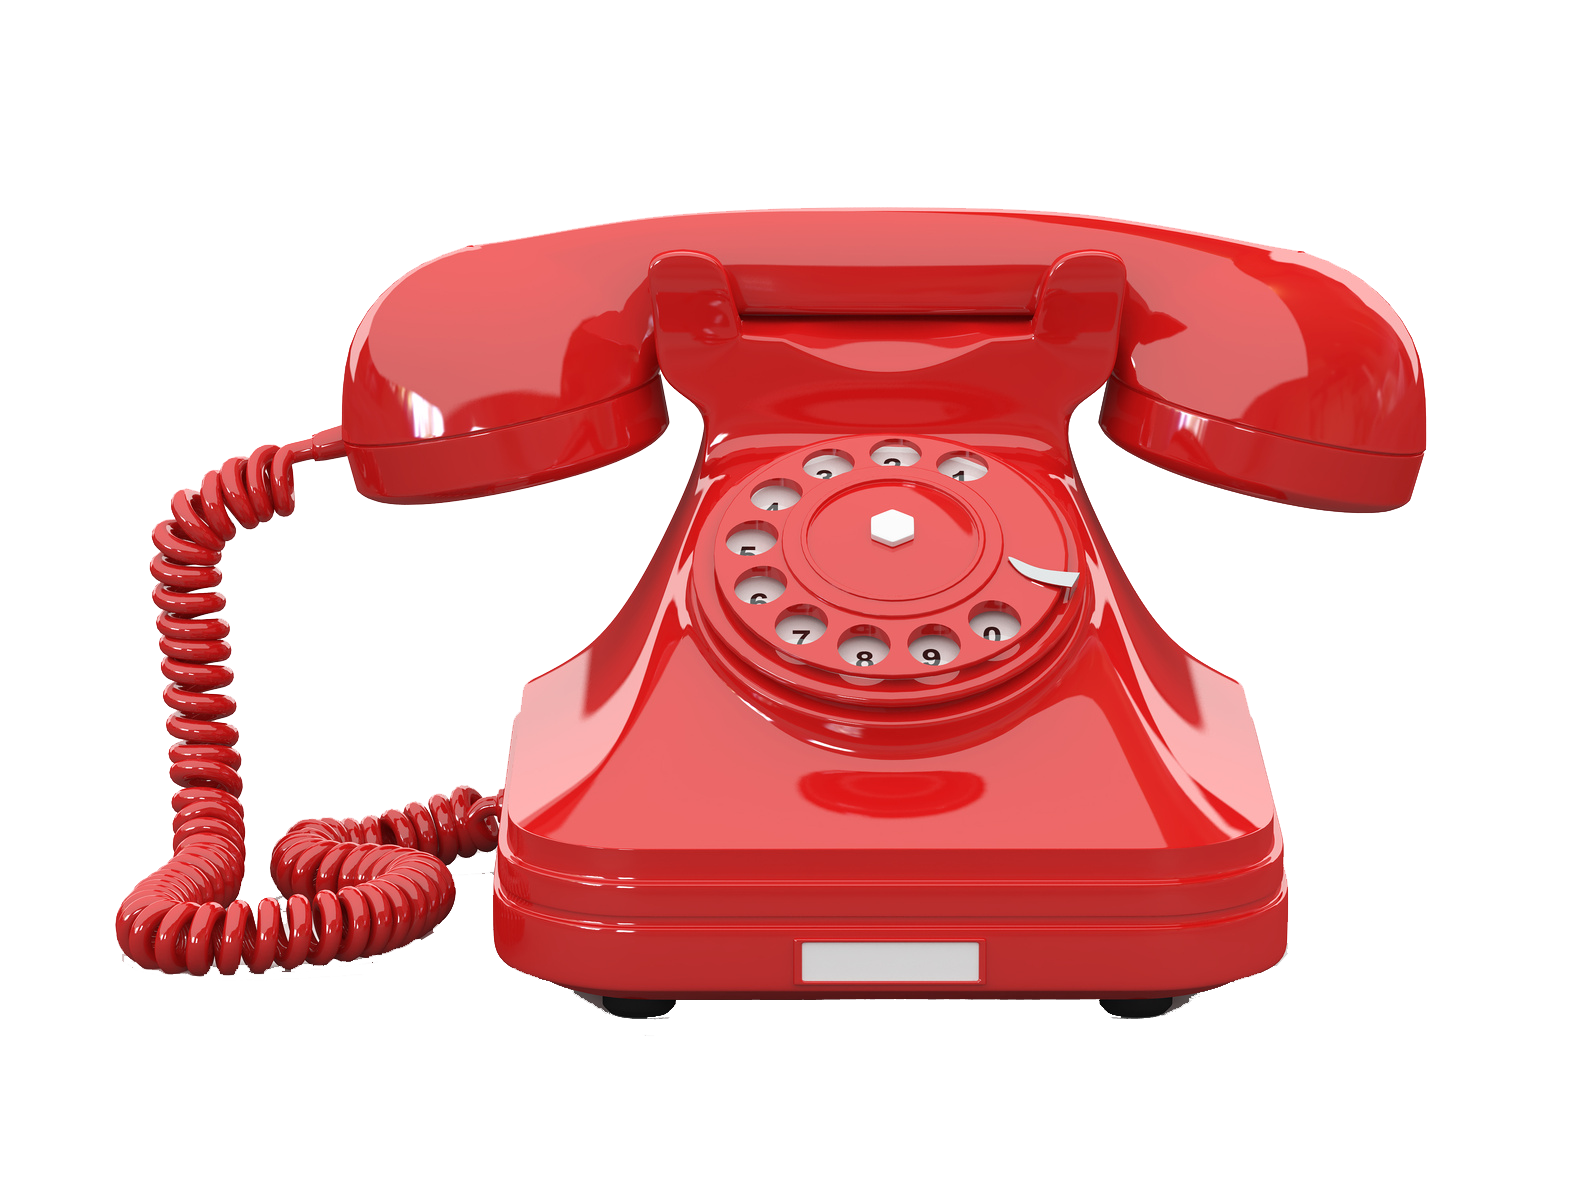 Telephone Image PNG HD - 125075